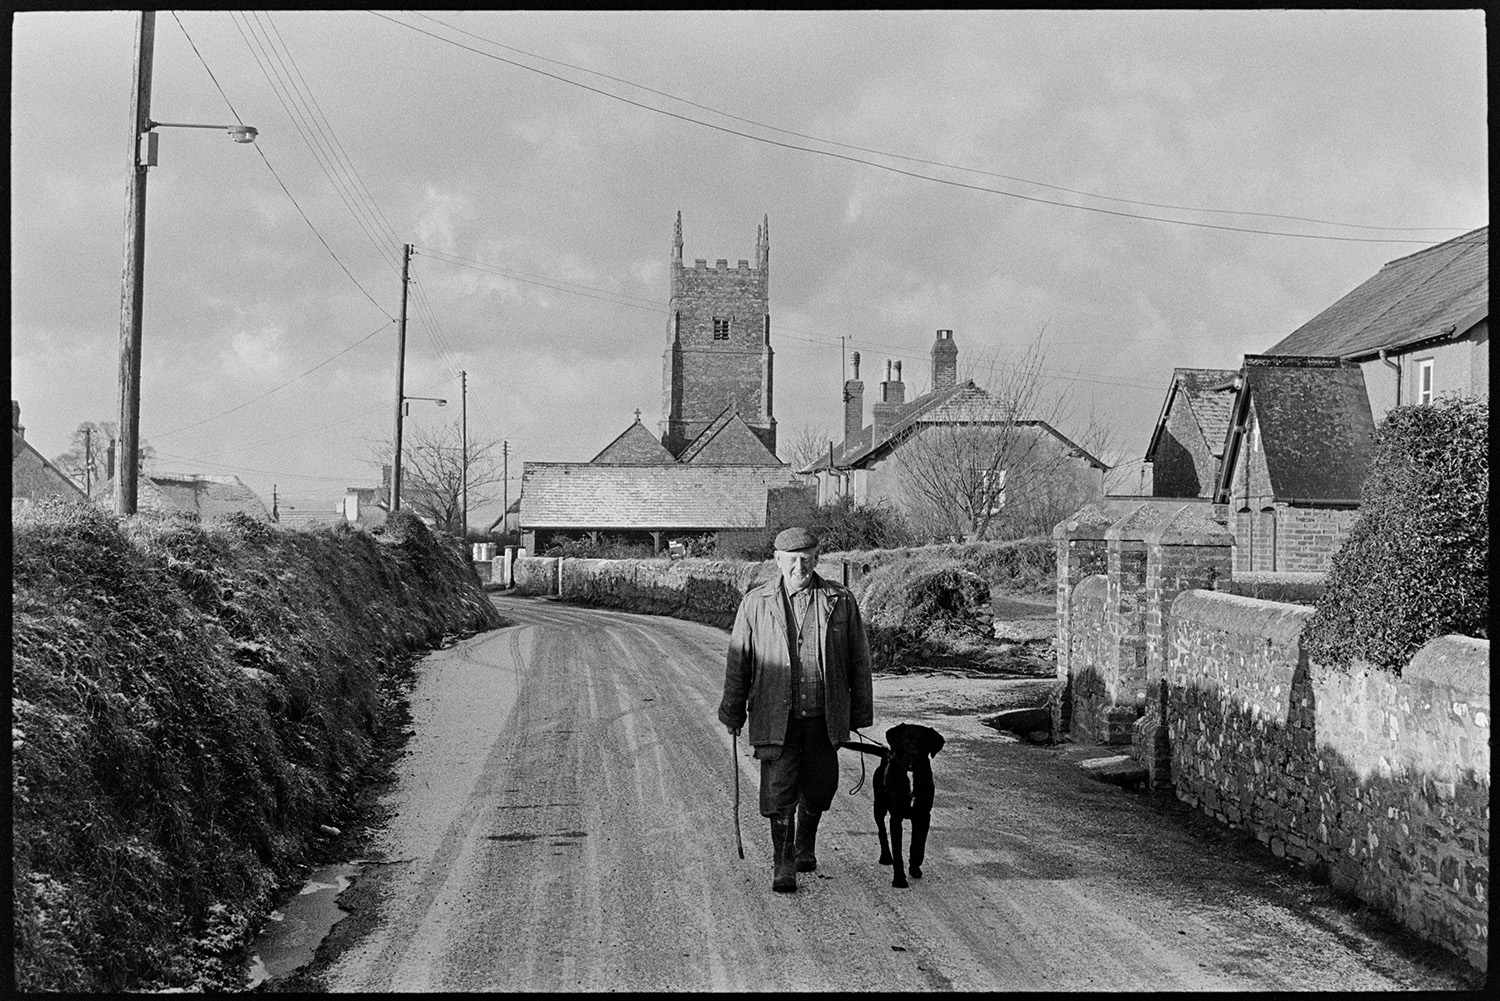 Village street under snow.
[Bob Friend walking a dog along a street in Roborough which has a light covering of snow. Houses and the church tower are visible in the background.]